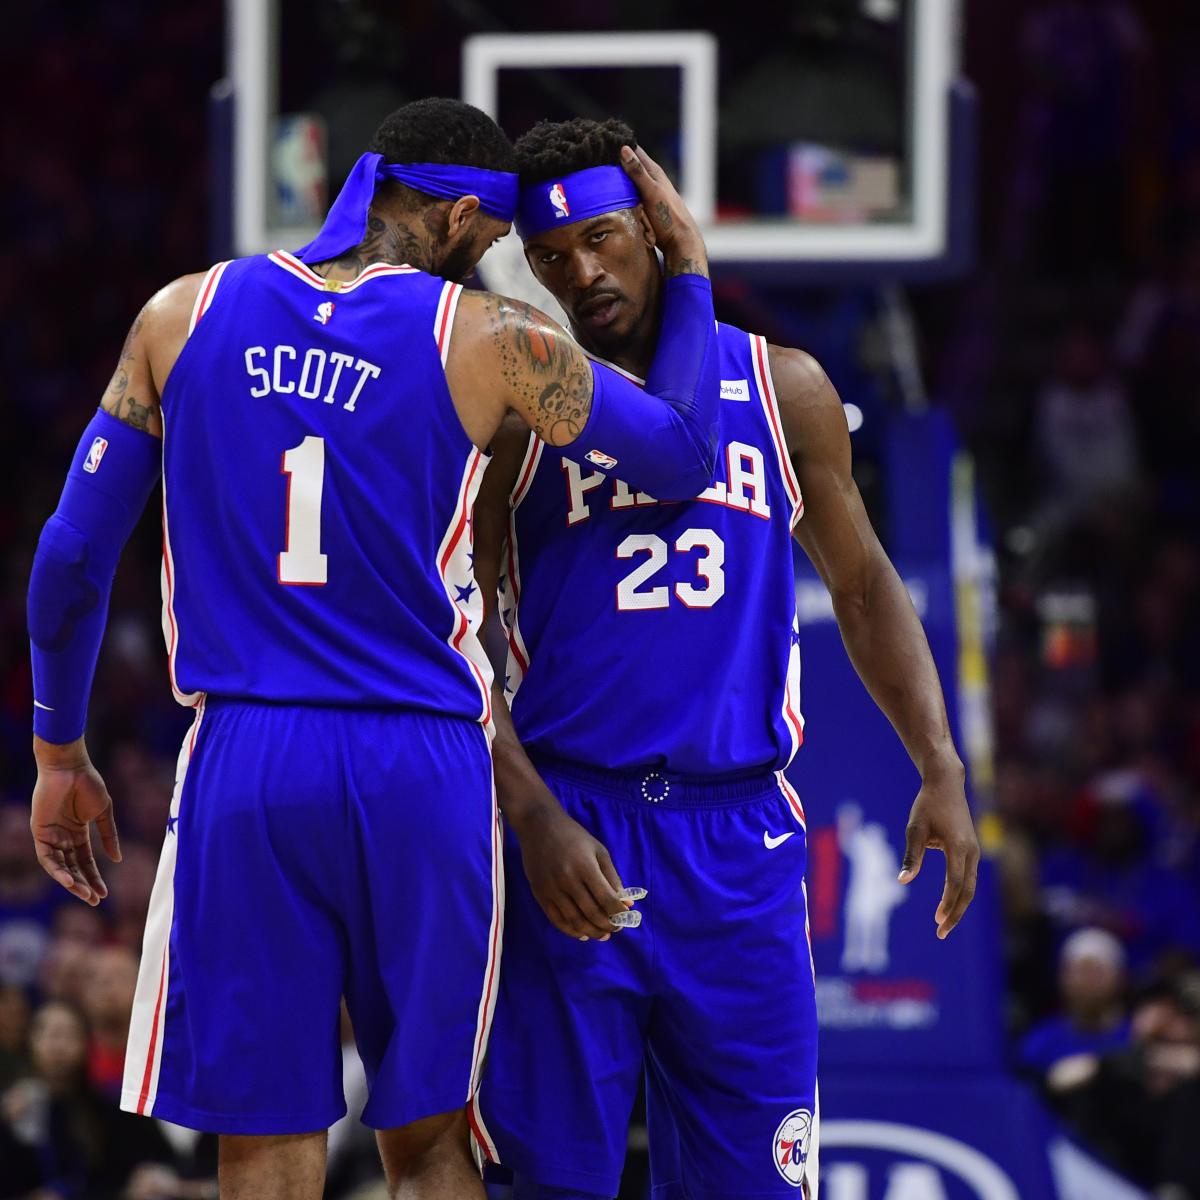 Sixers' Jimmy Butler on teammate Mike Scott: 'He's a real one